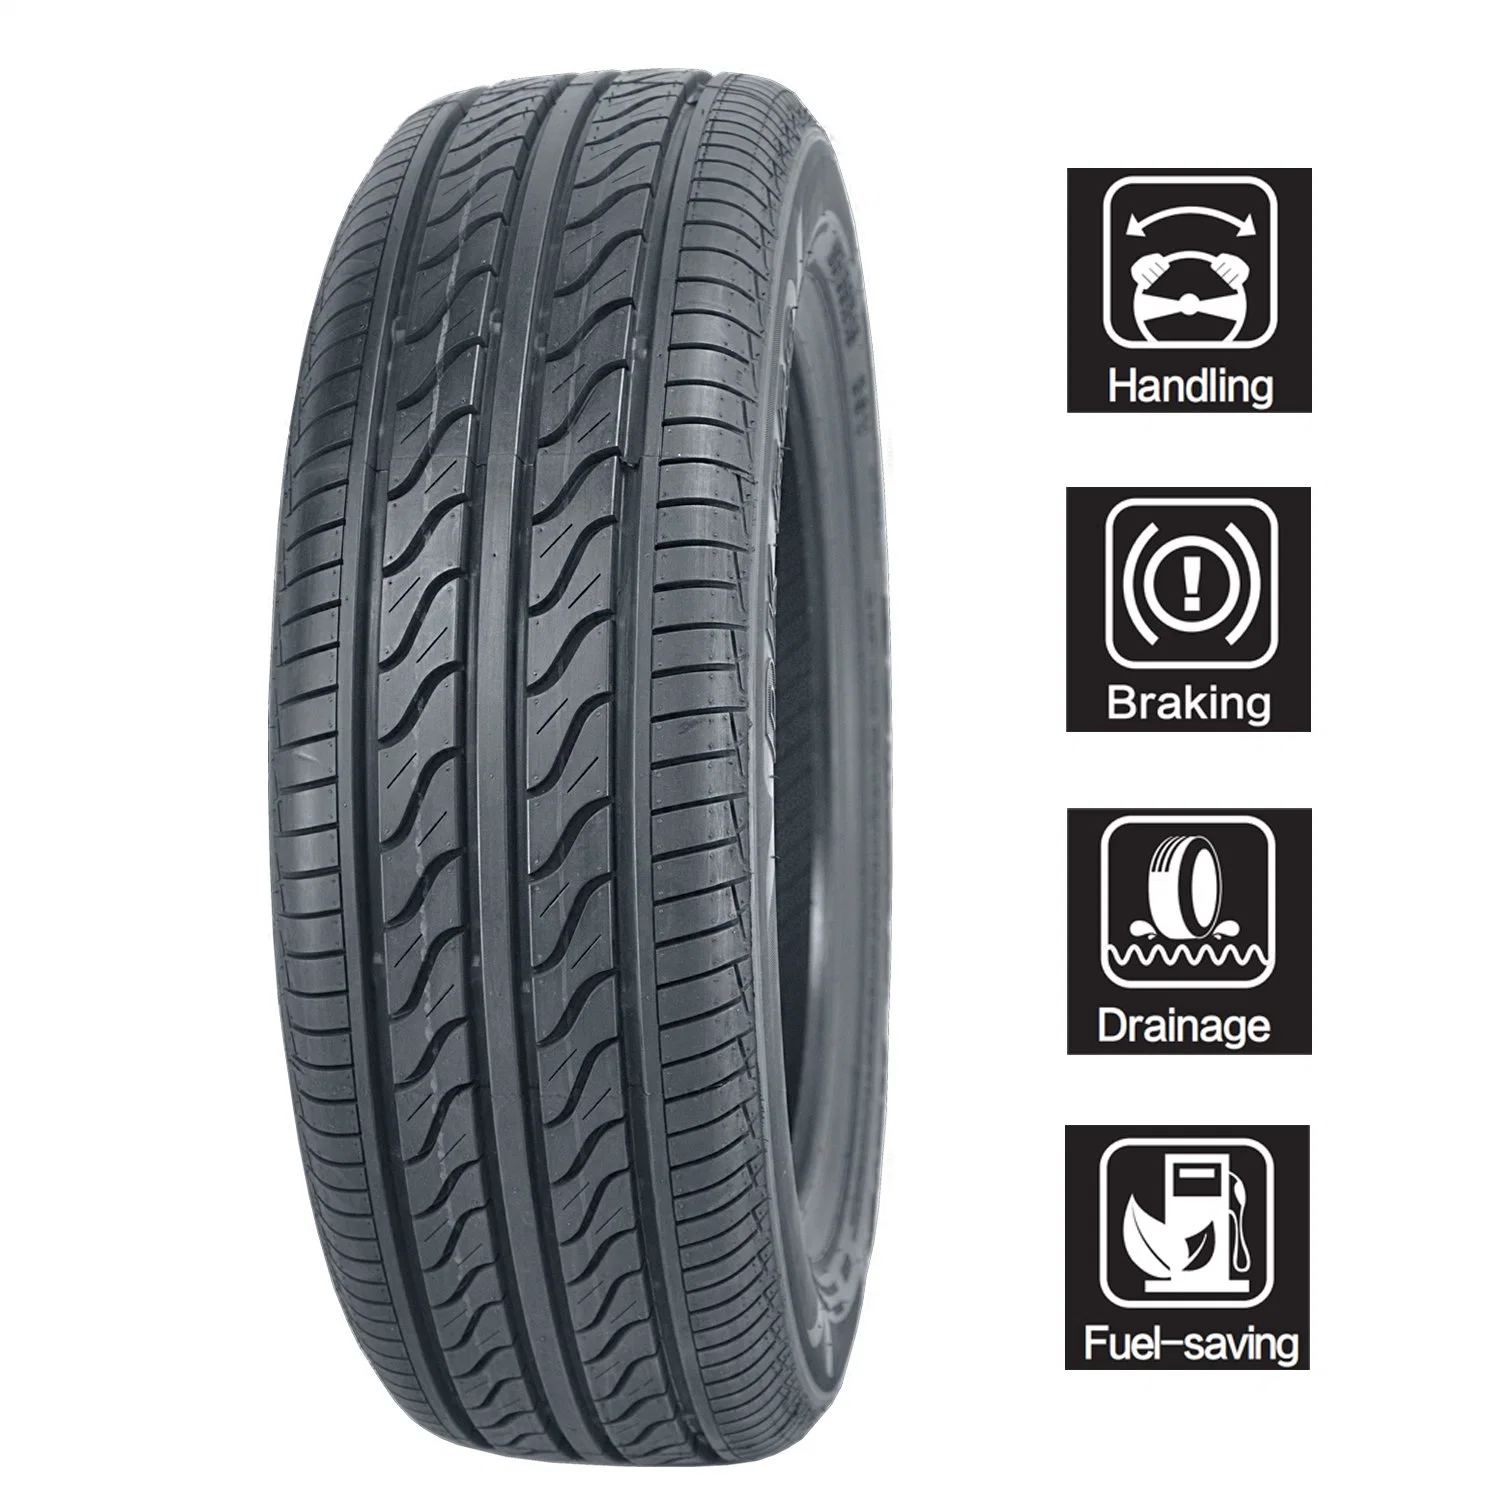 Timax All Season R15 R16 Made in China Factory Tubeless PCR SUV UHP Van Wholesale Radial Passenger Car Tyre Tire